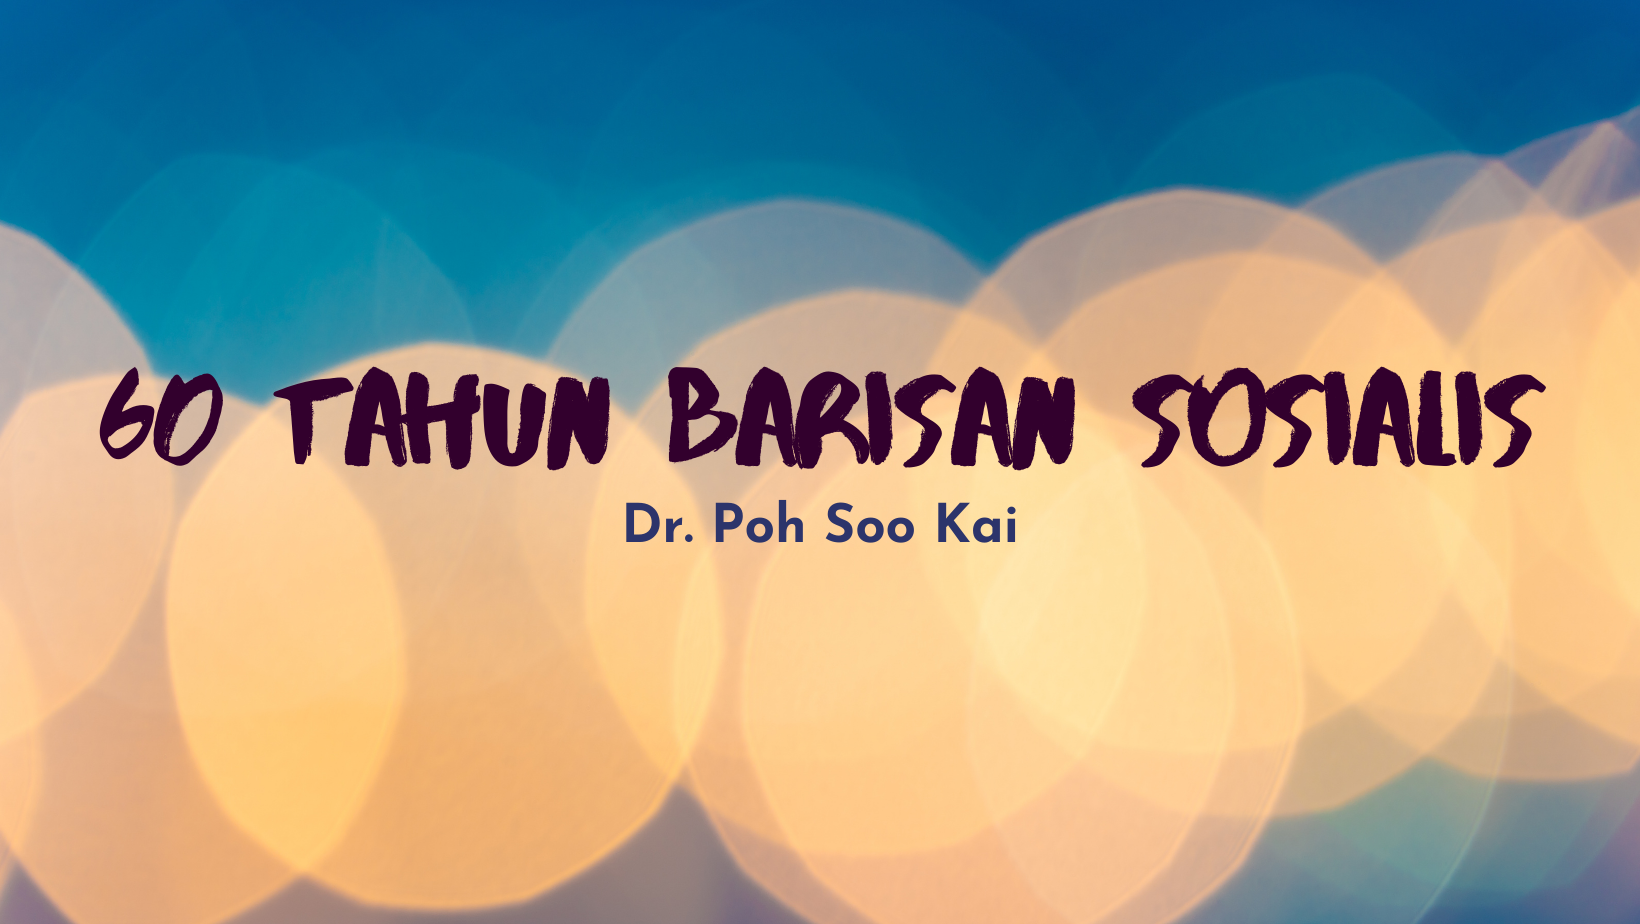 Poh Soo Kai: 60th Anniversary of the Formation of the Barisan Sosialis